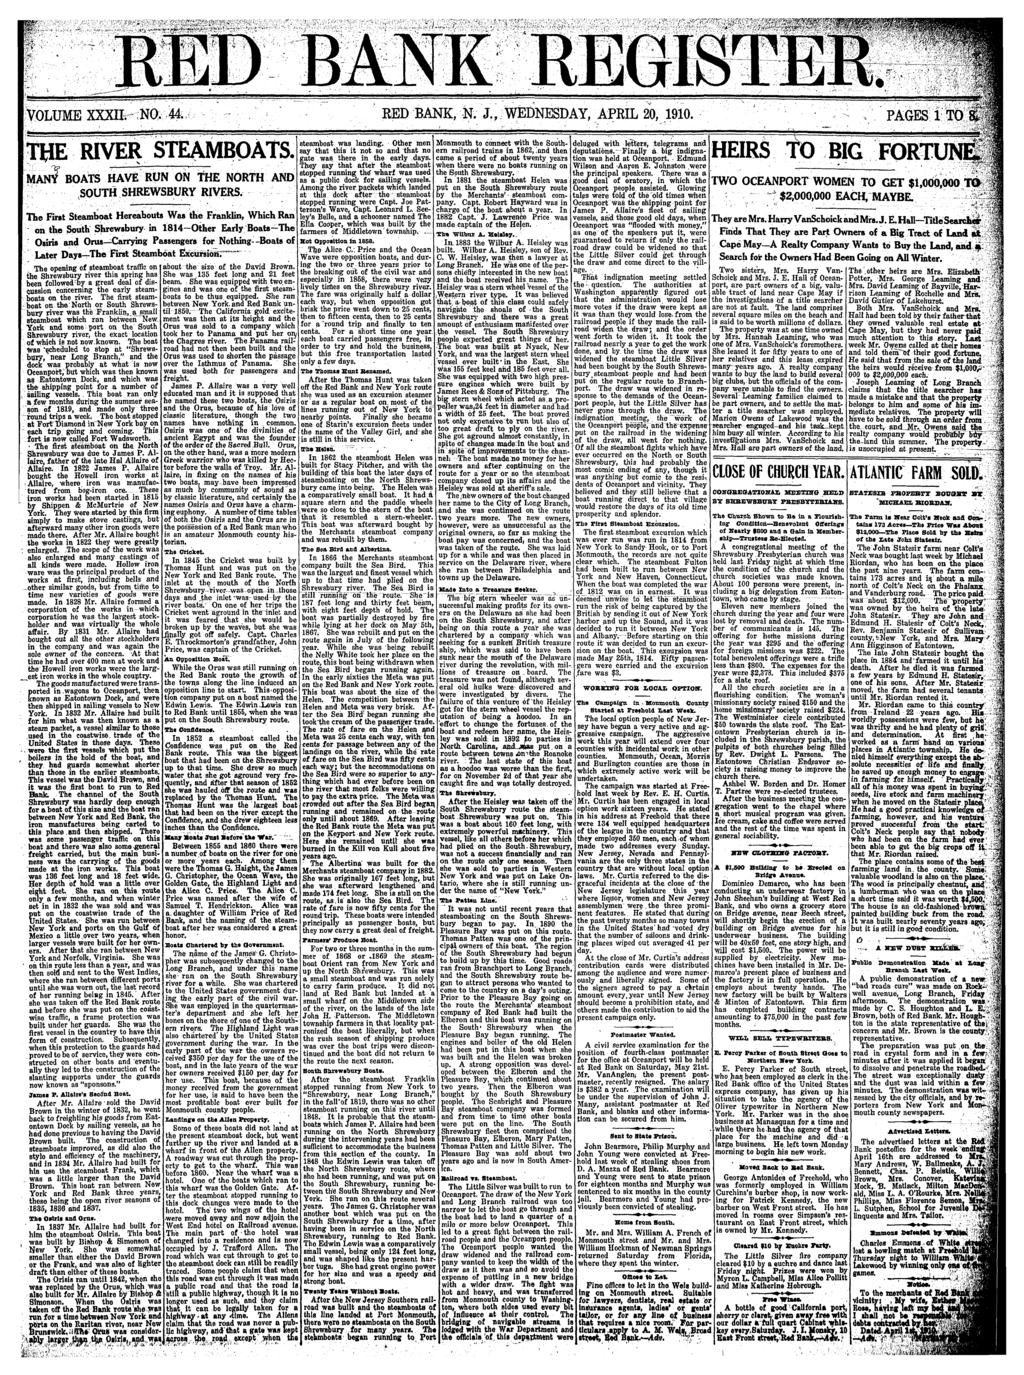 BANK REGISTER. VOLUME 44;, RED BANK, N. J., WEDNESDAY, APRIL 20, 90. PAGES TO ;, %. THE RIVER STEAMBOATS. MAN? BOATTS HAVE RUN ON THE NORTH AND ; SOUTH SHREWSBURY RIVERS.